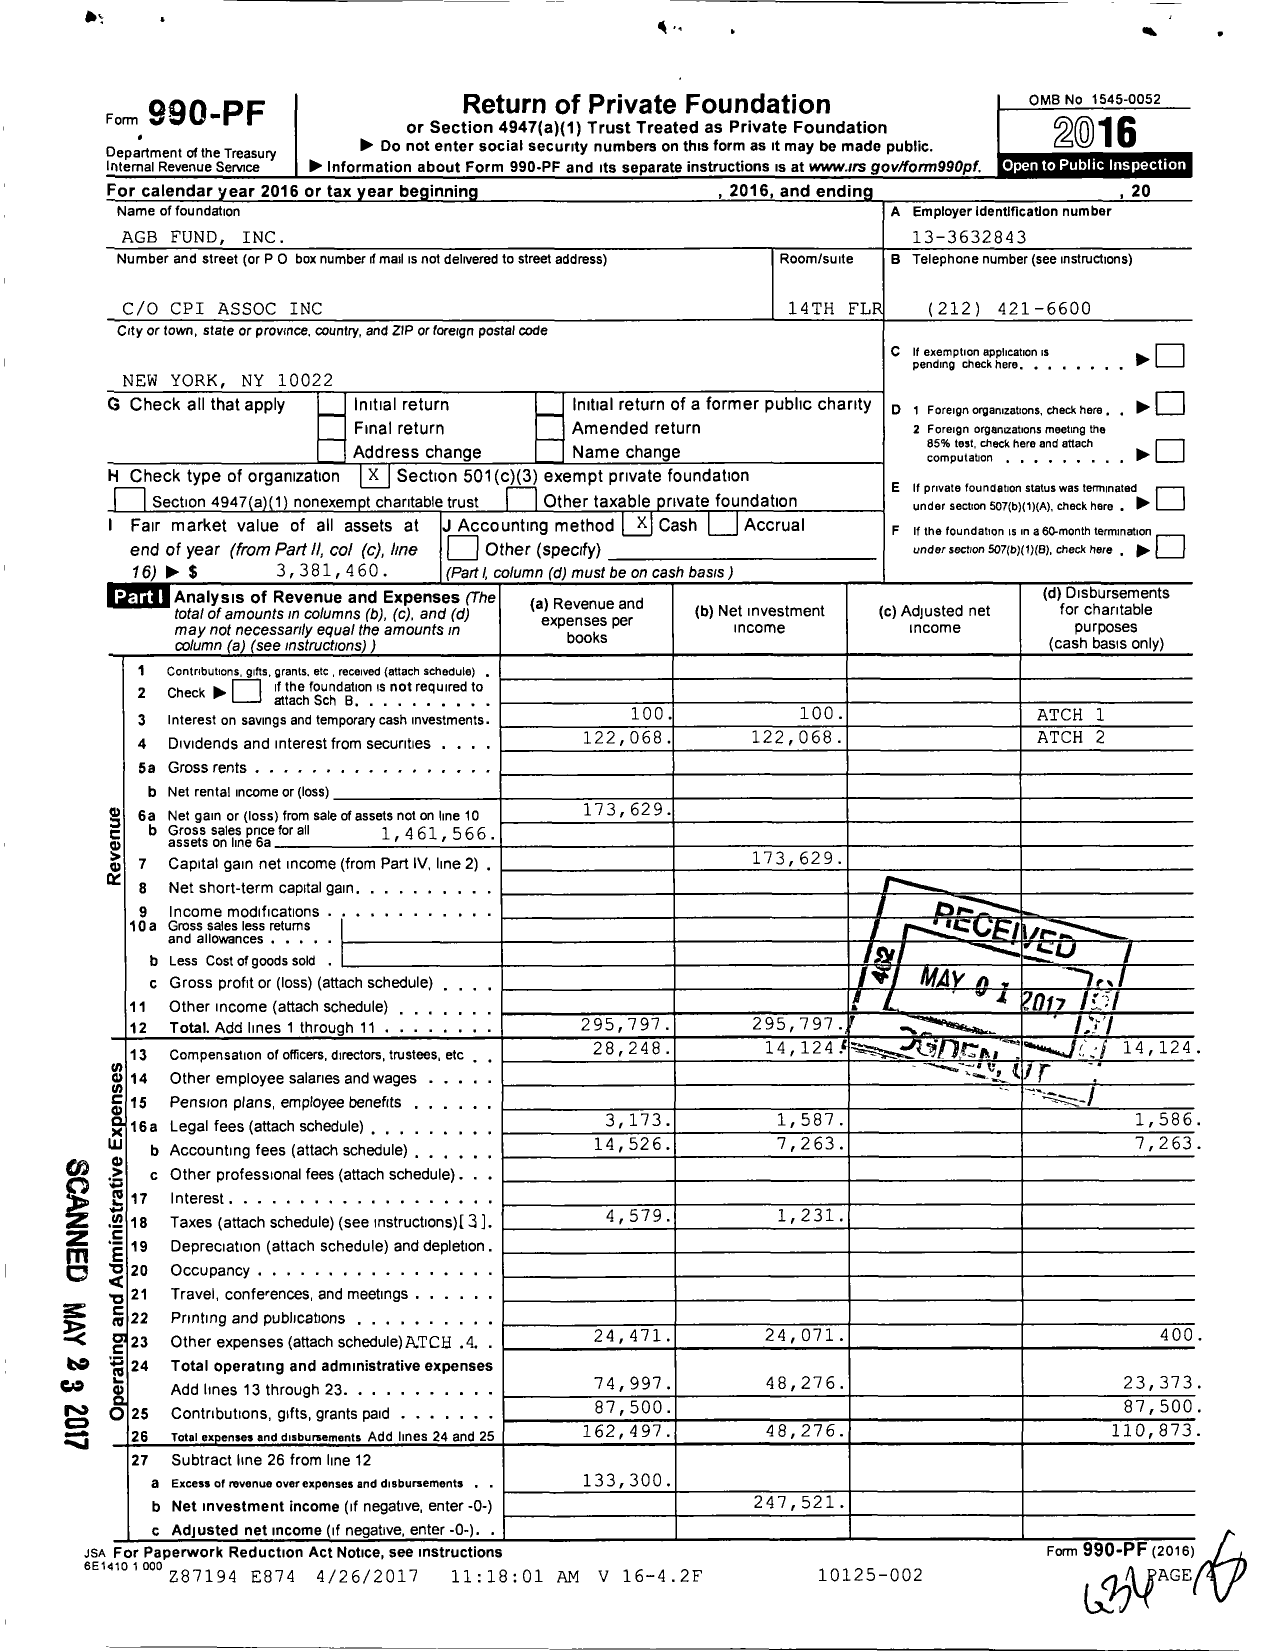 Image of first page of 2016 Form 990PF for Agb Fund